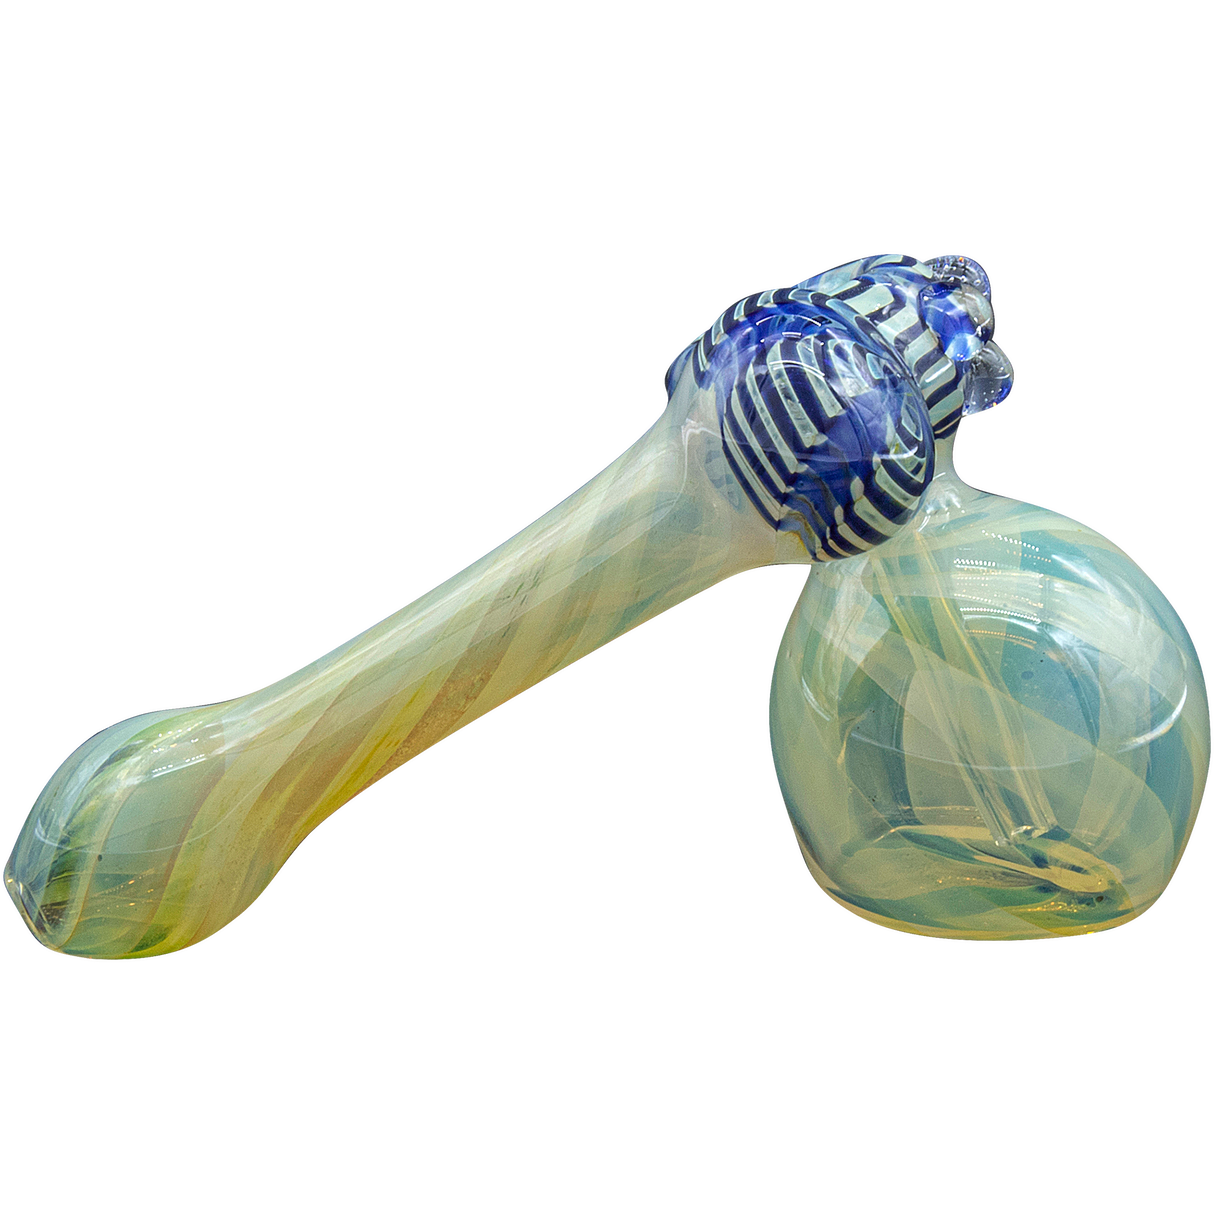 LA Pipes Raked Sidecar Fumed Bubbler Pipe, 6" Borosilicate Glass, Assorted Colors